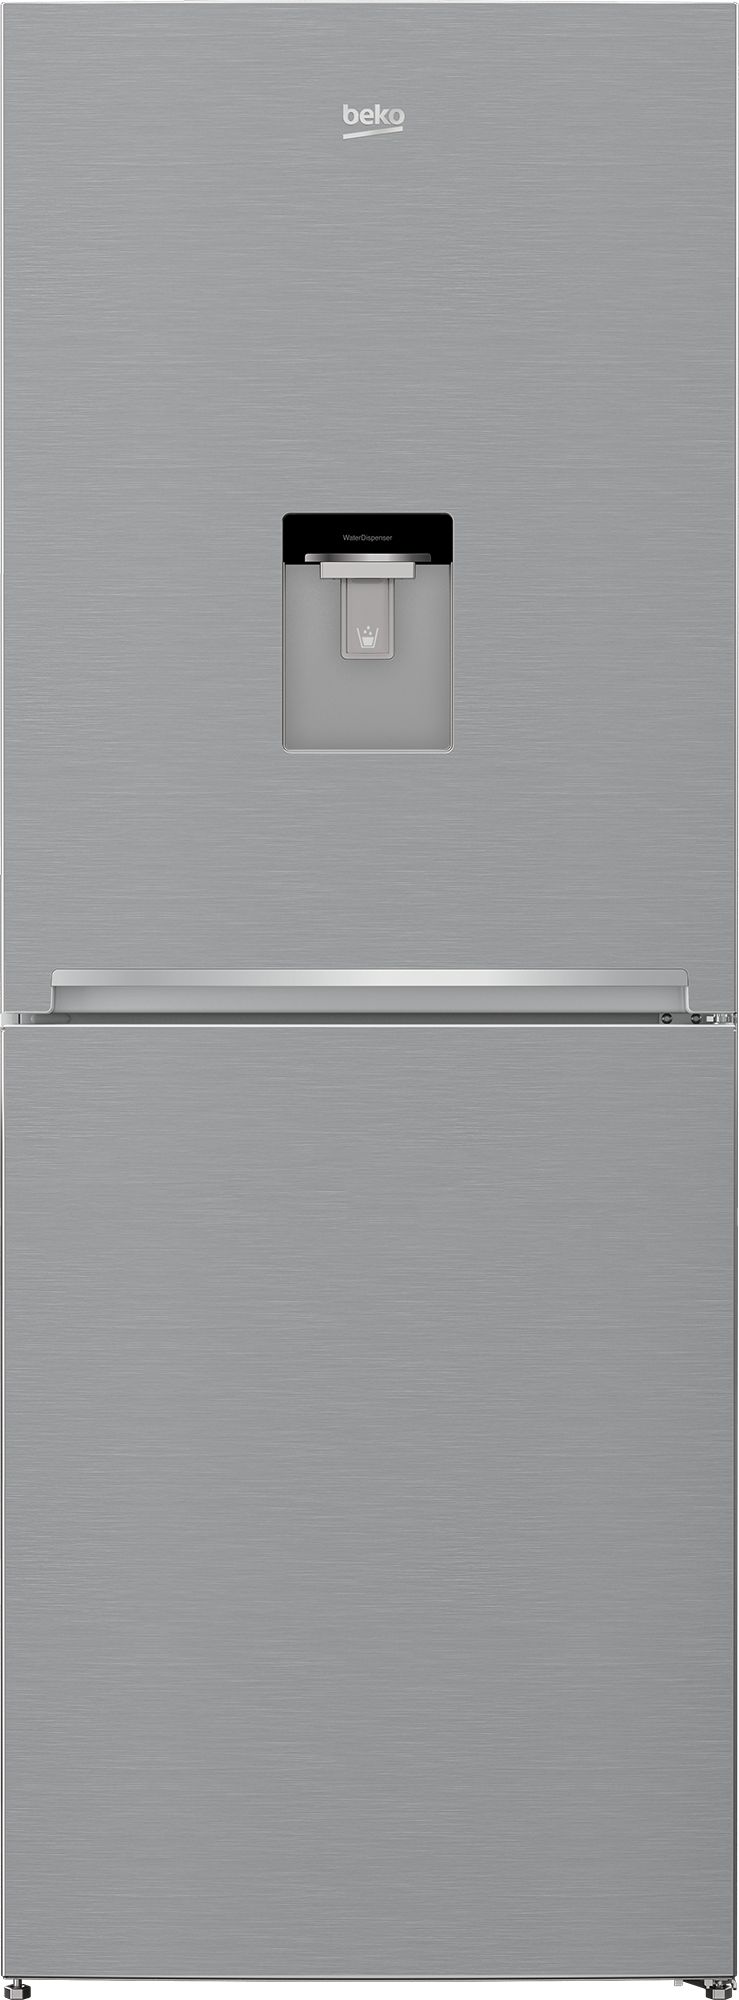 Beko CFG4790DPS 50/50 Frost Free Fridge Freezer - Stainless Steel Effect - E Rated, Stainless Steel